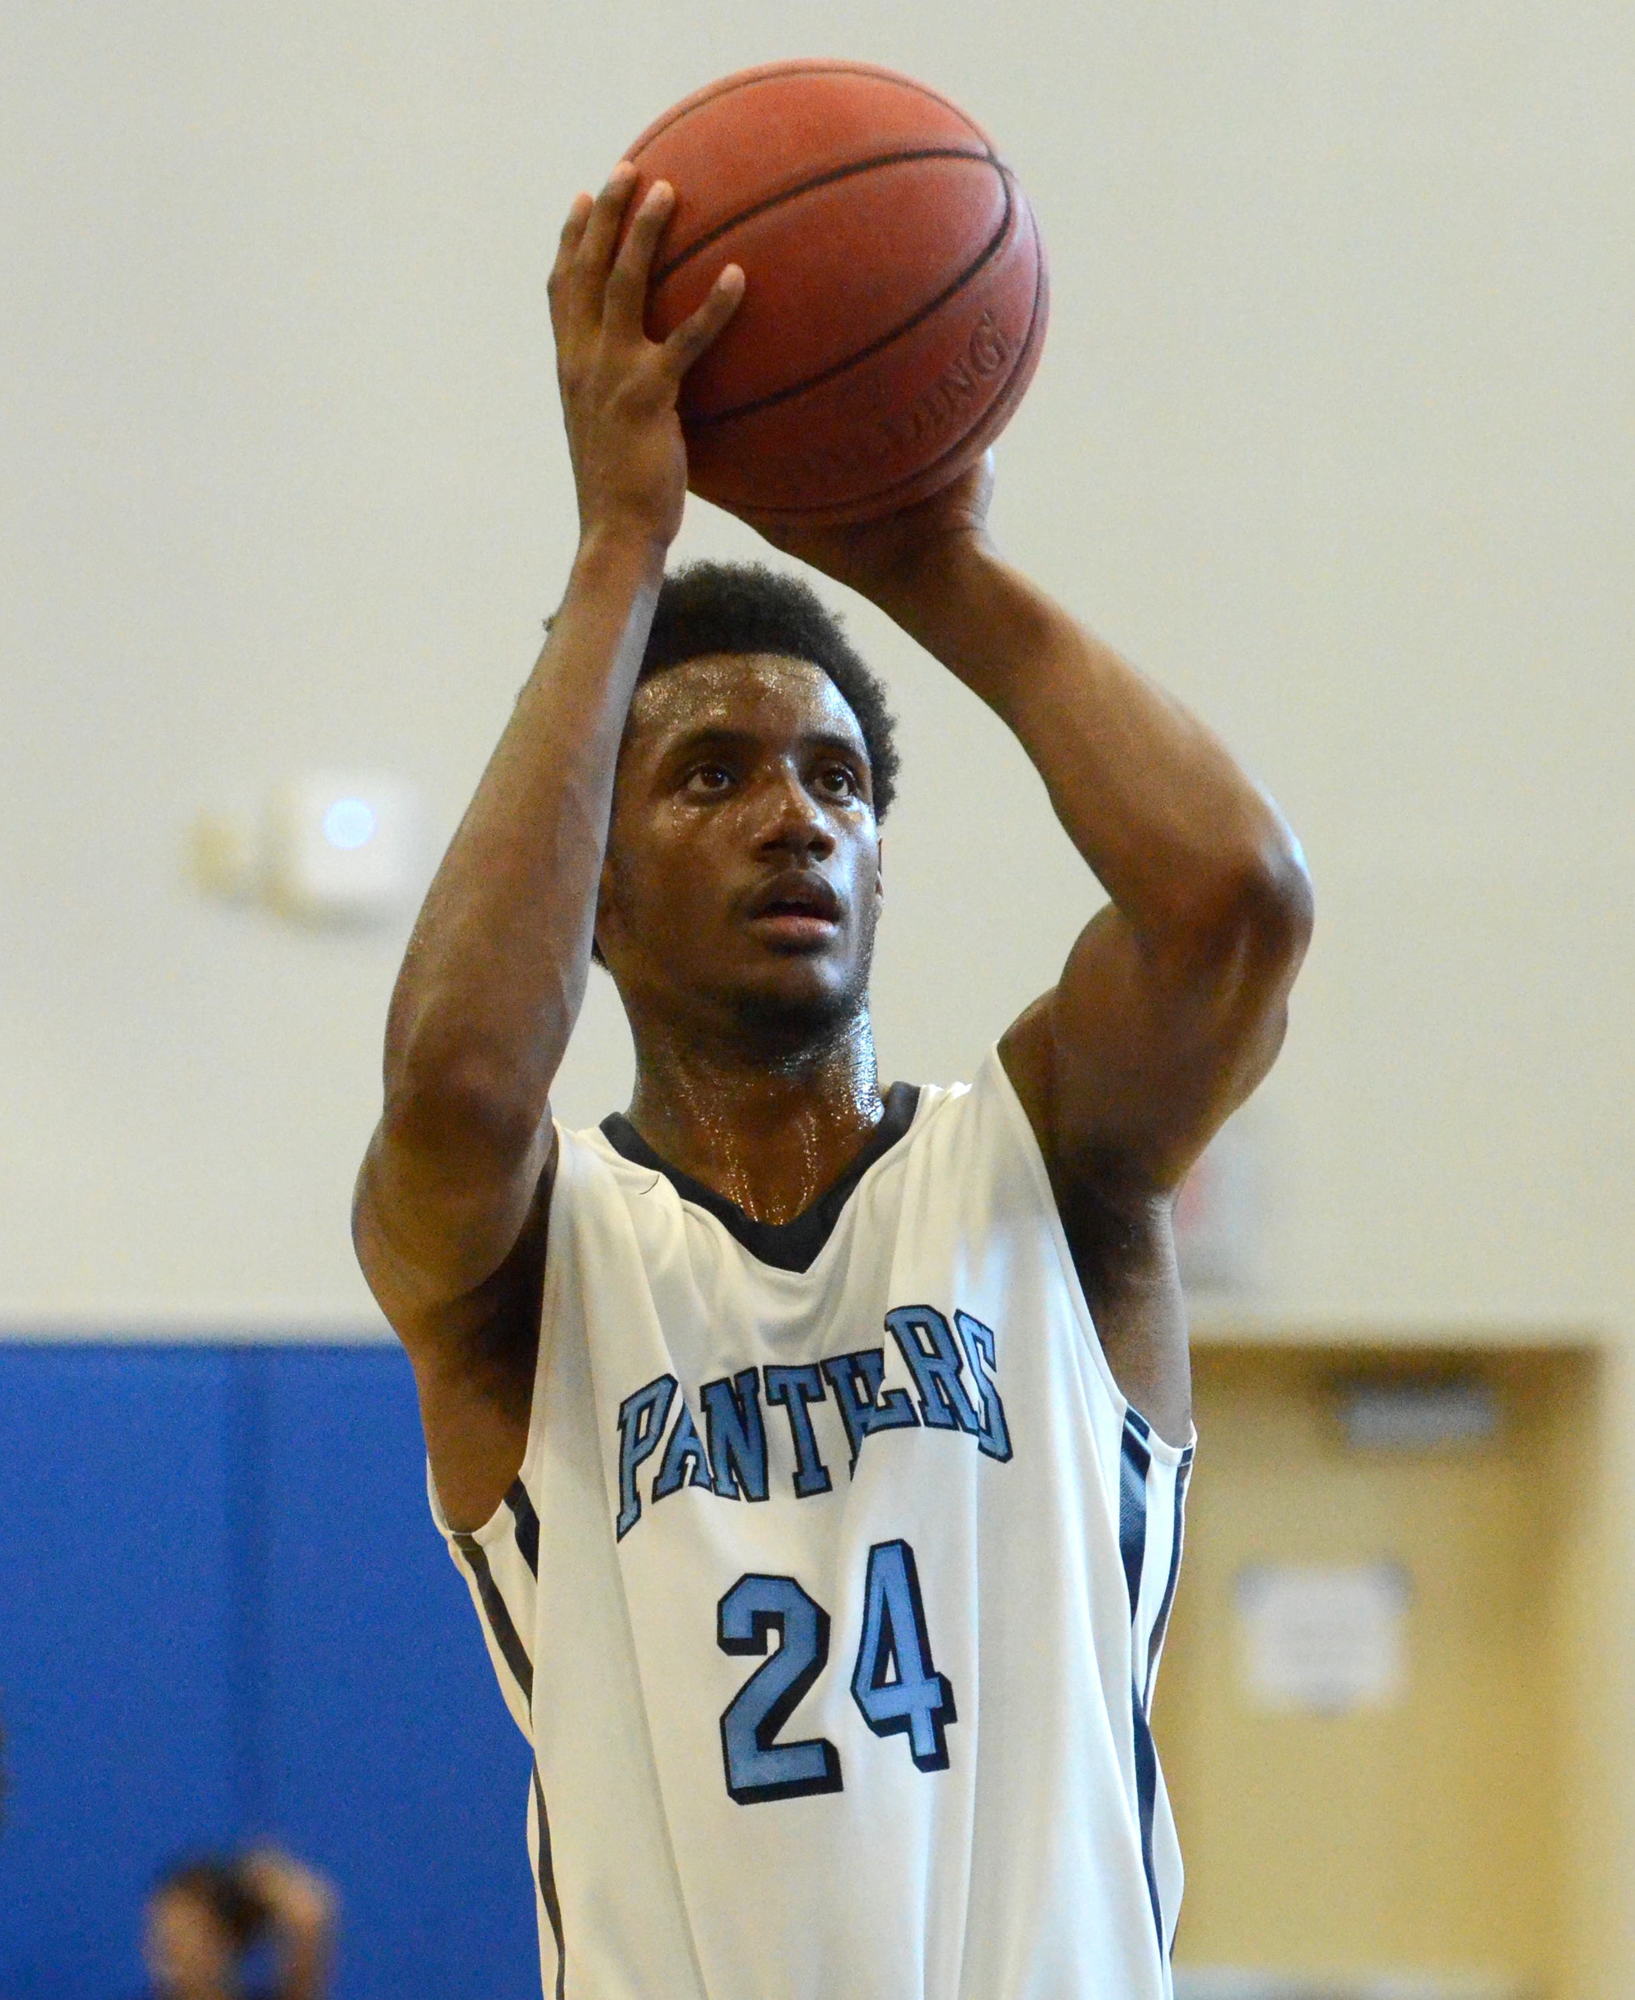 Senior Justin Tucker is averaging a double-double for the Panthers this season.